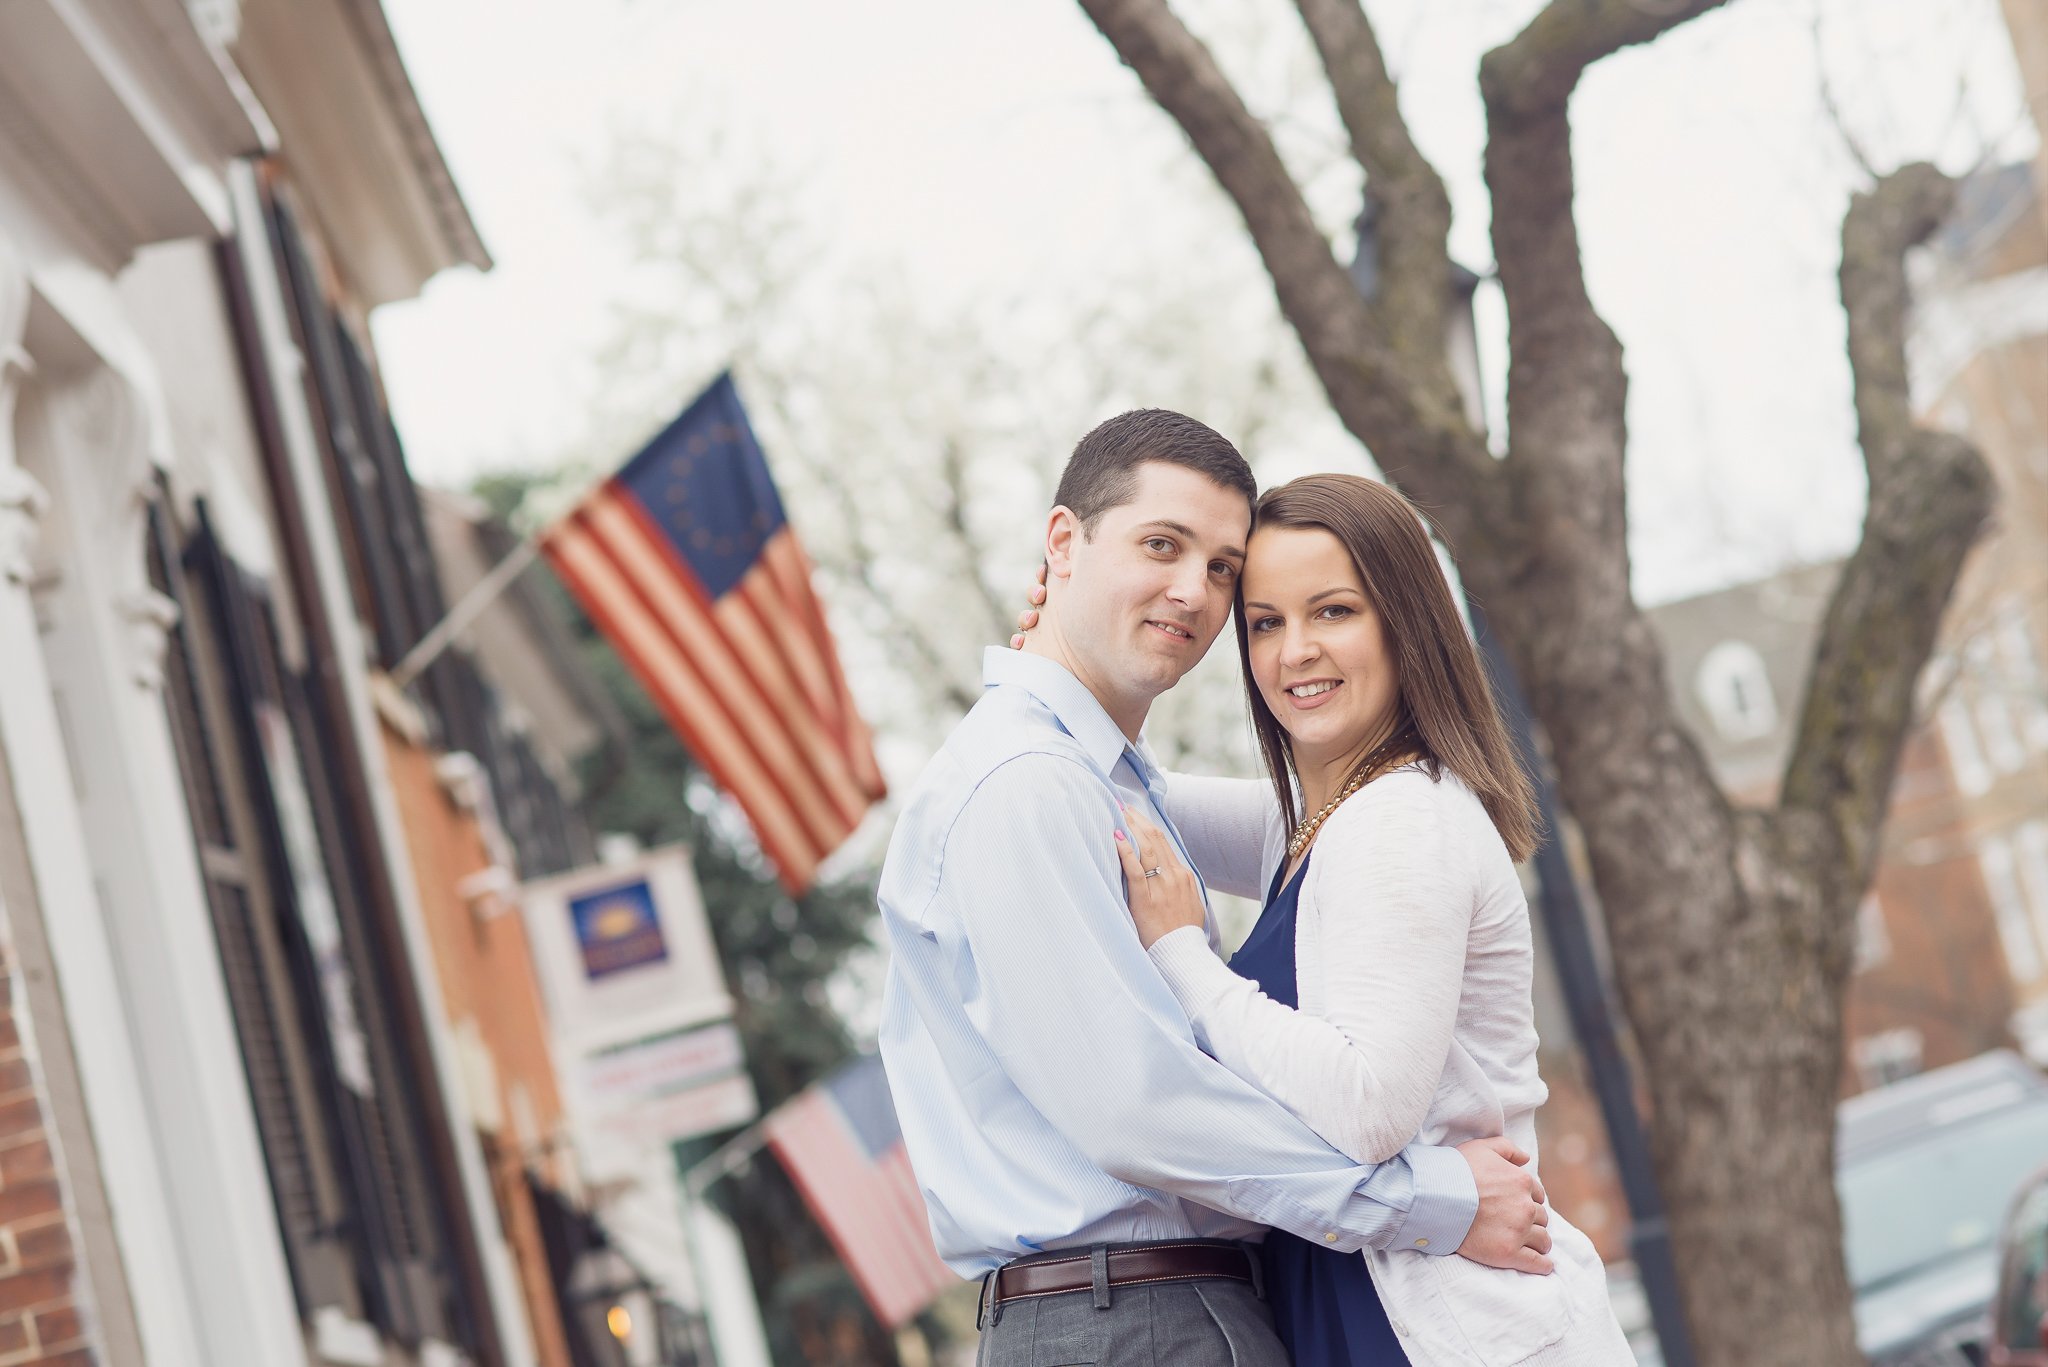 couples photos in old town alexandria